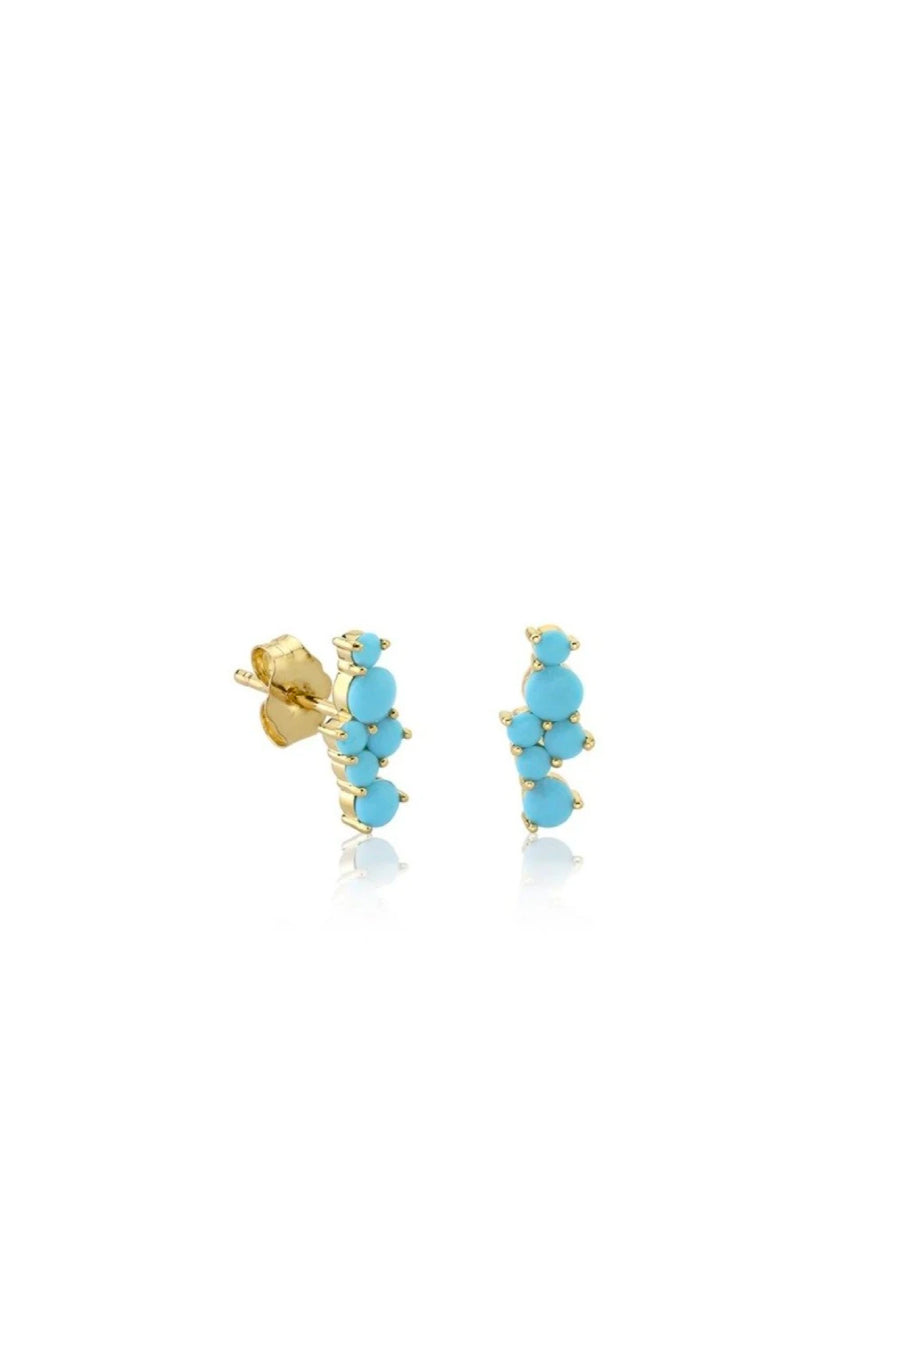 Sydney Evan Turquoise Cocktail Bar Stud Earrings - Yellow Gold